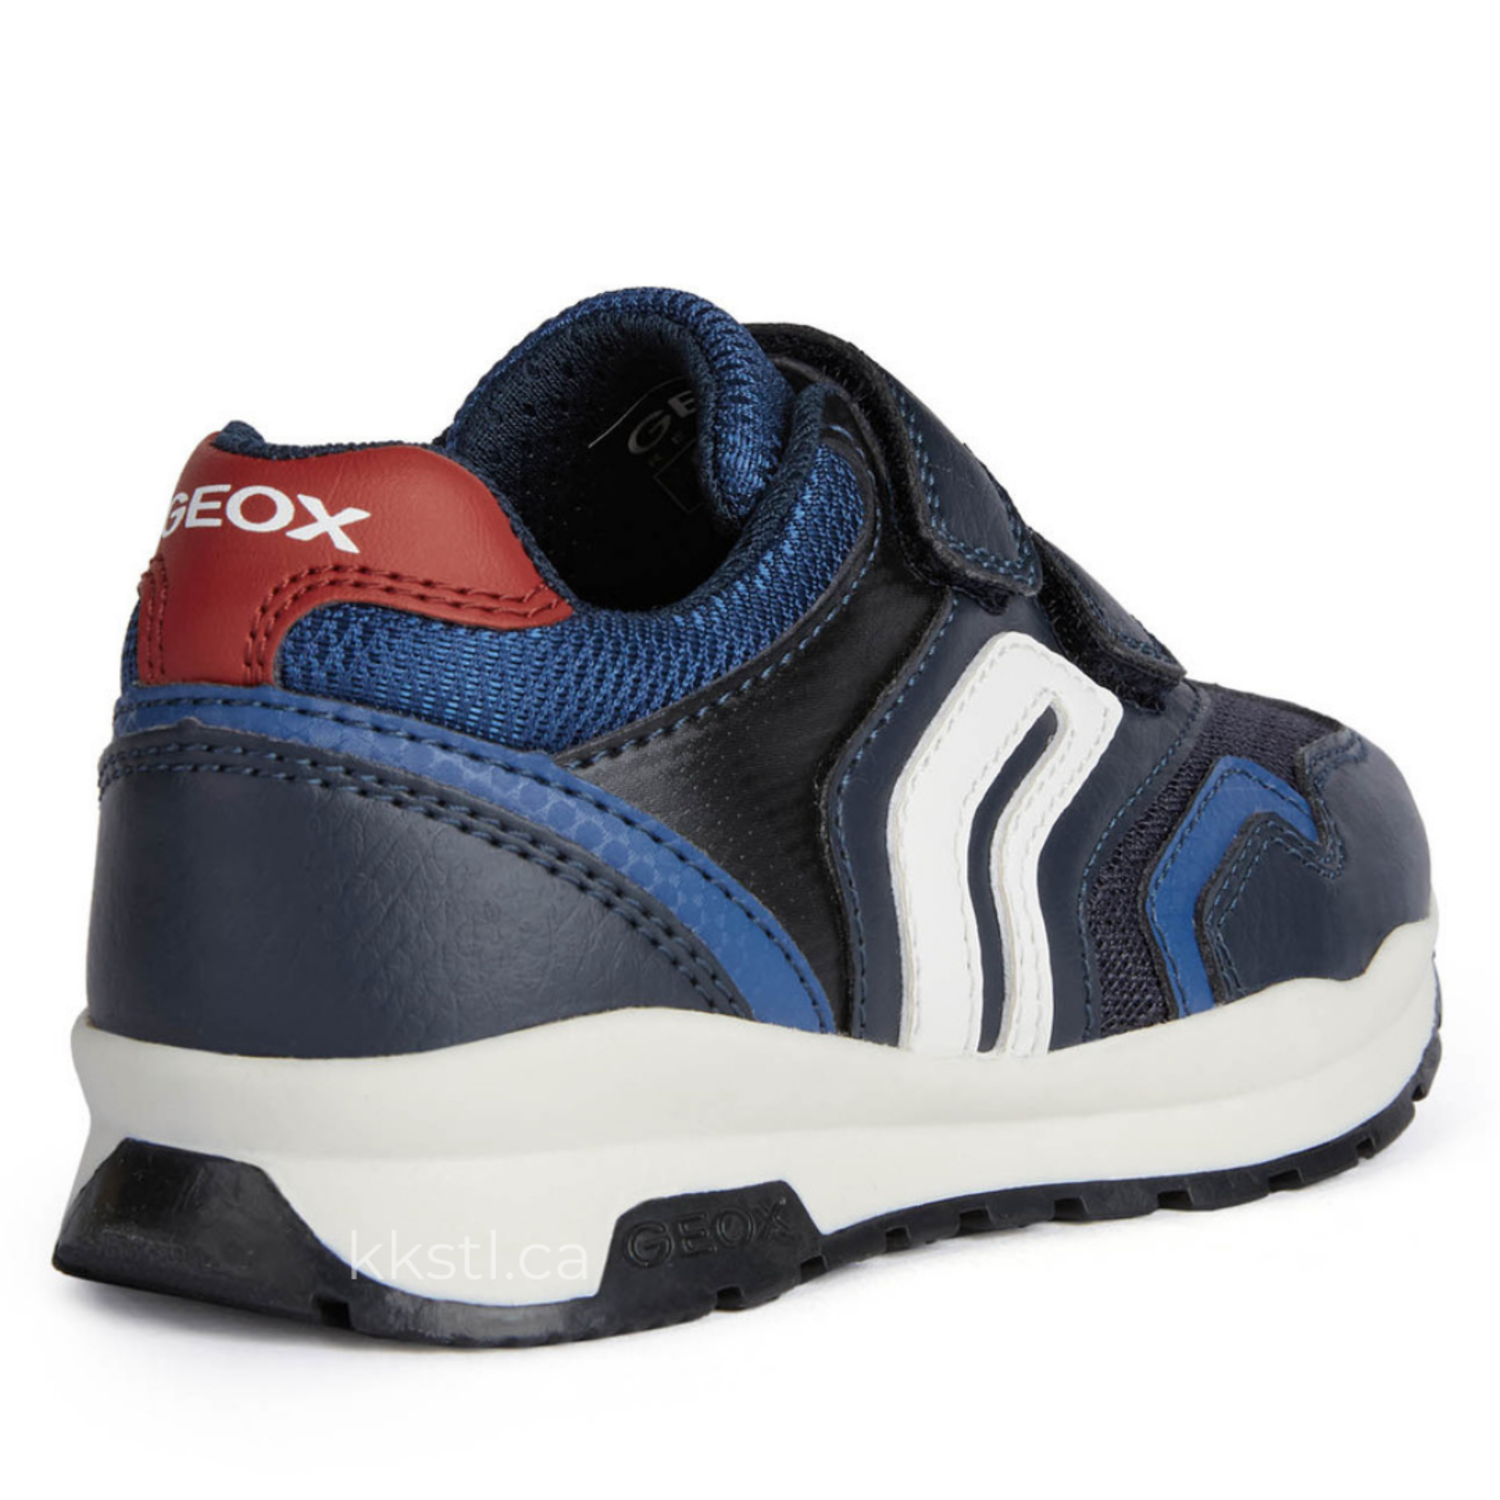 Geox J Pavel Navy/Red - Kids Shoes Canada - Kiddie St Laurent